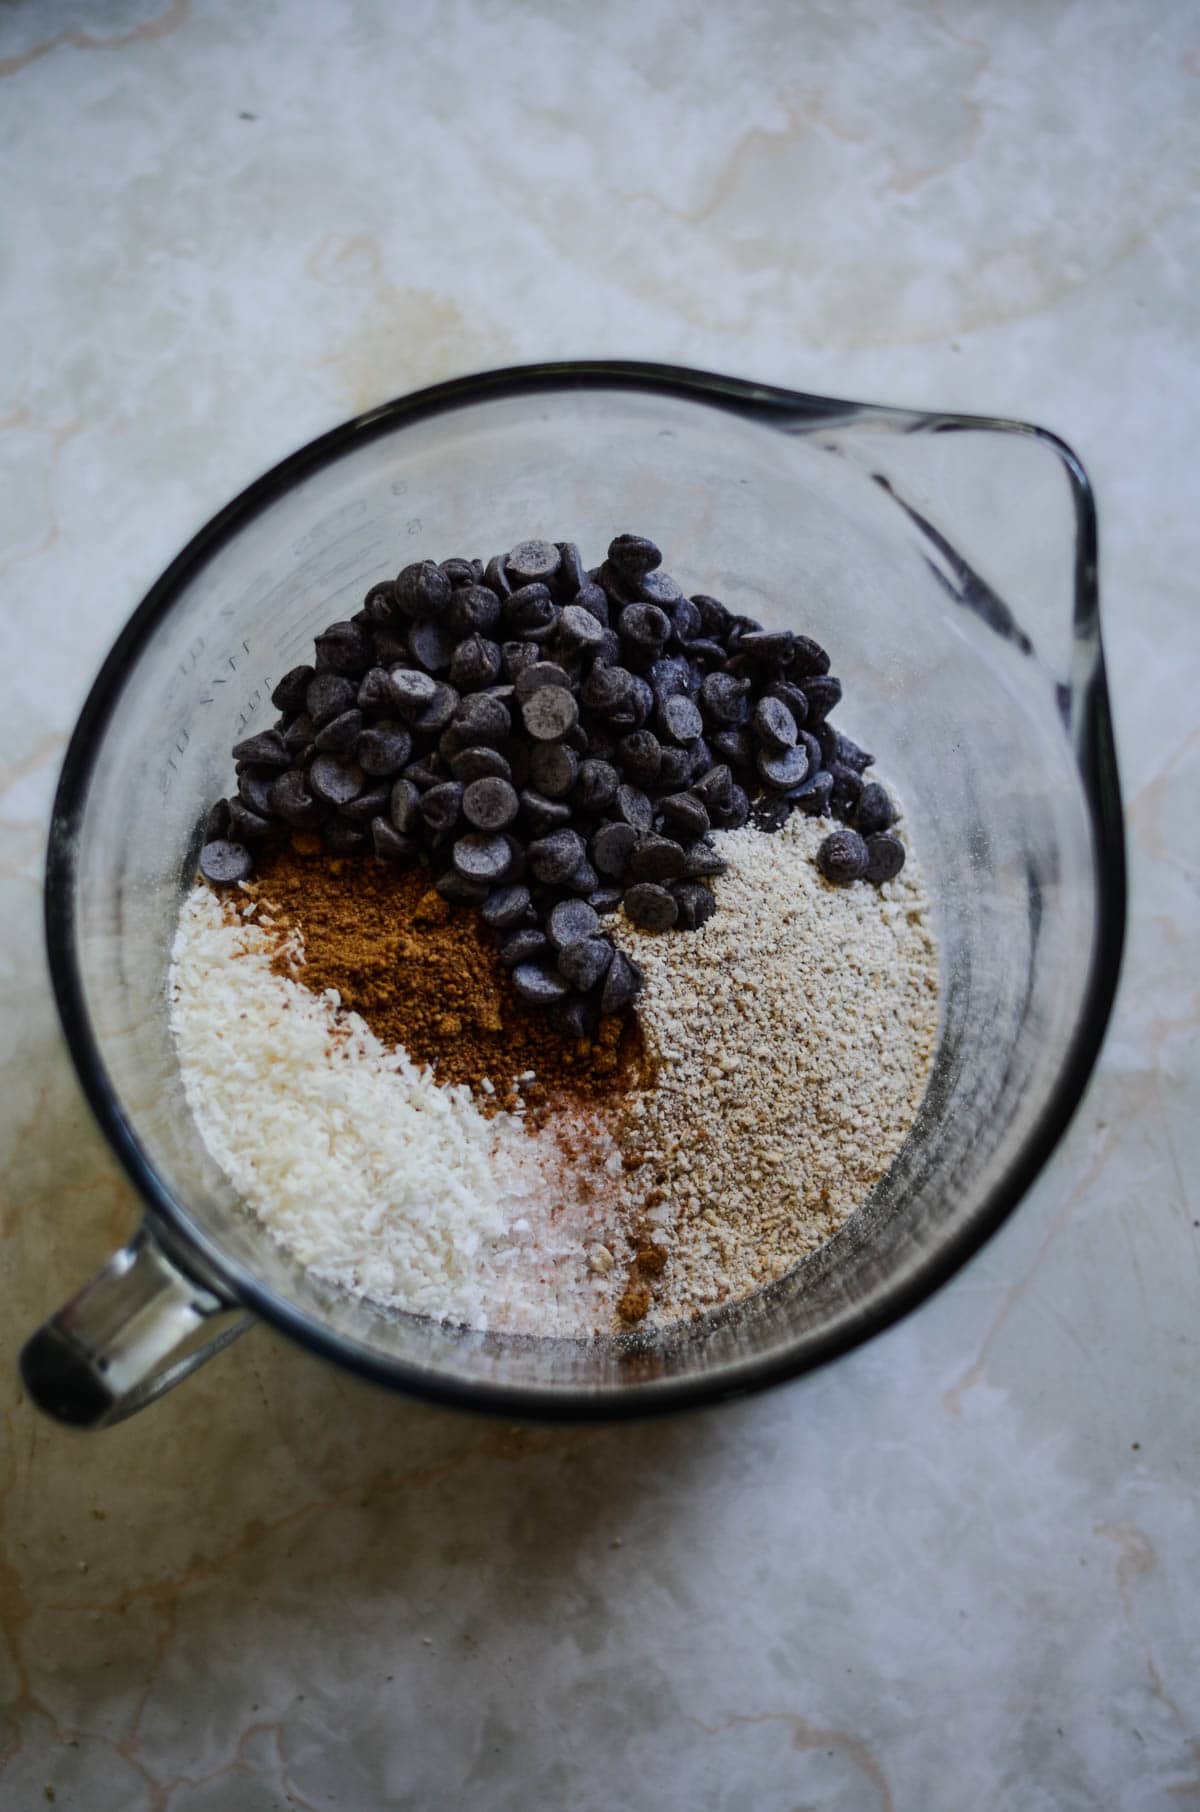 Chocolate chips, coconut sugar, oats, ground oats in a glass mixing bowl.